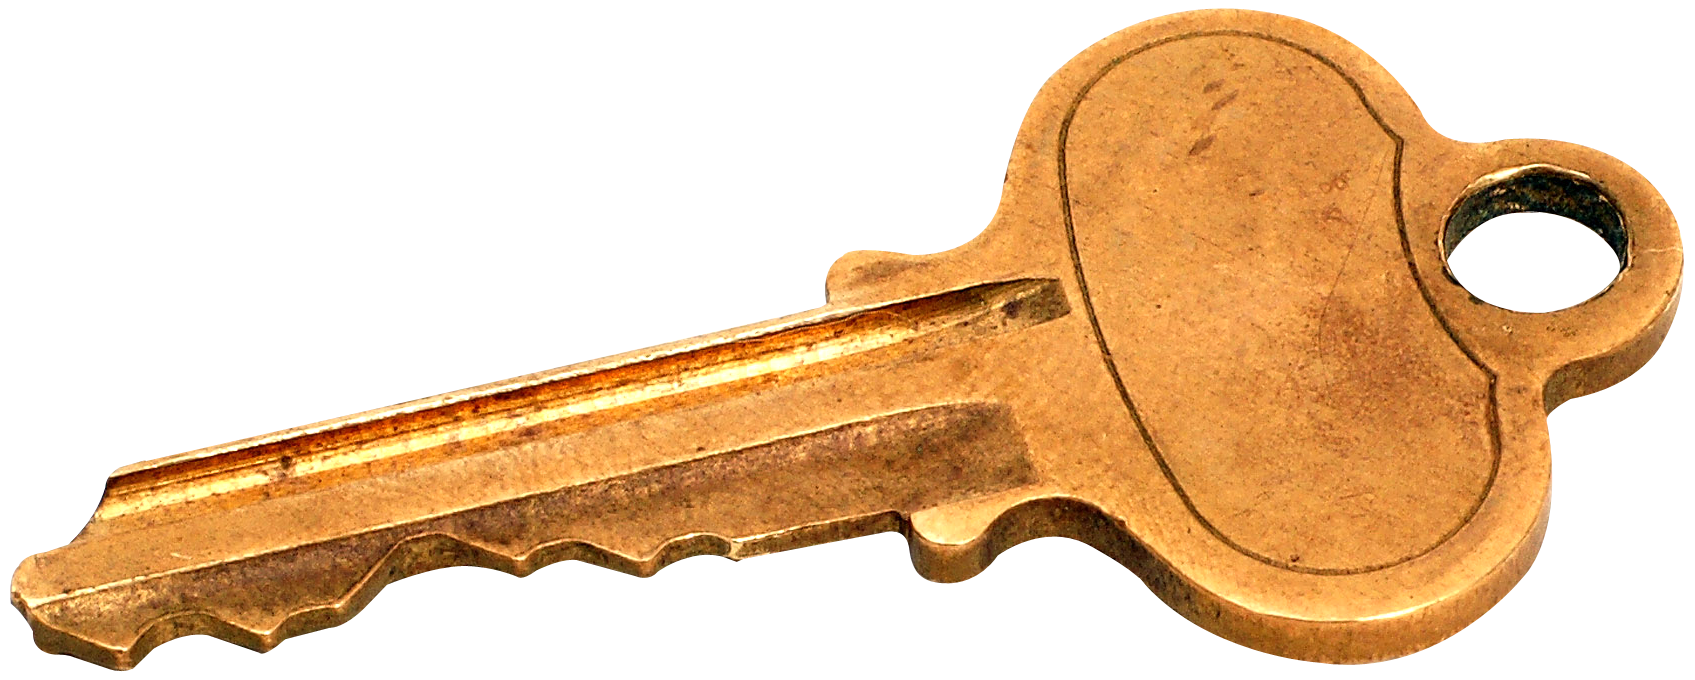 key in hand PNG image